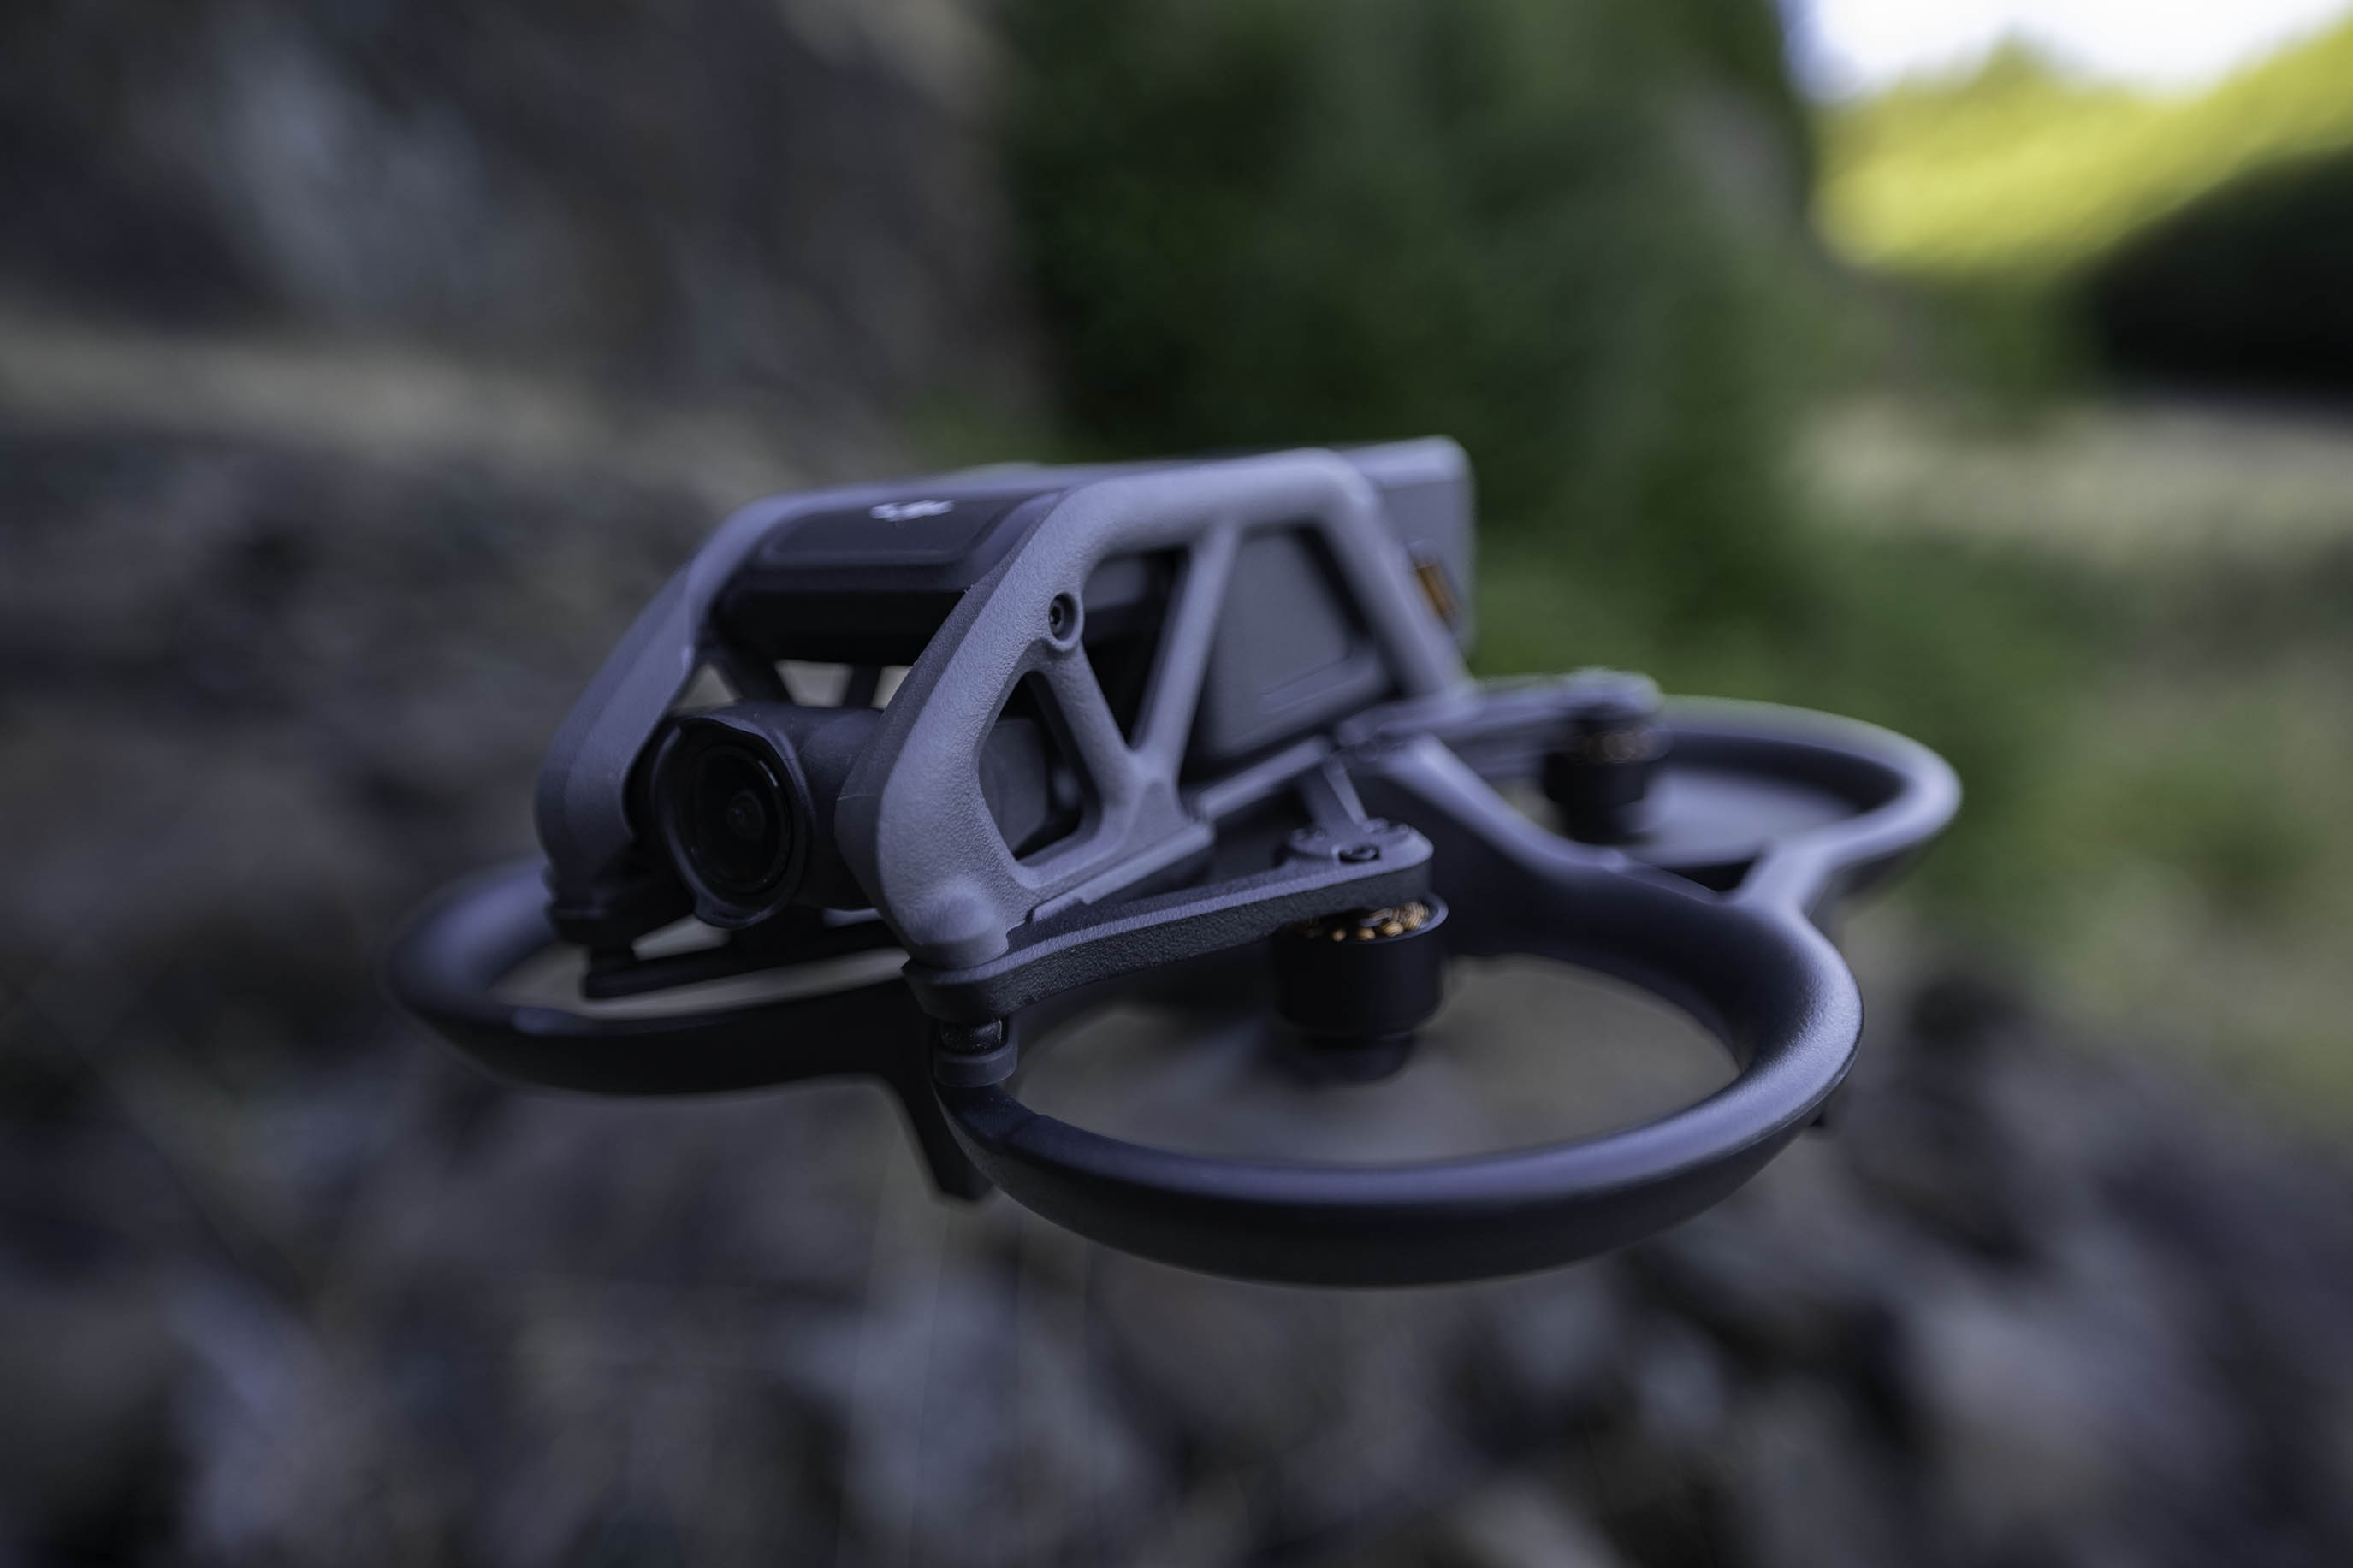 DJI Avata drone review: An incredible first-person flying experience